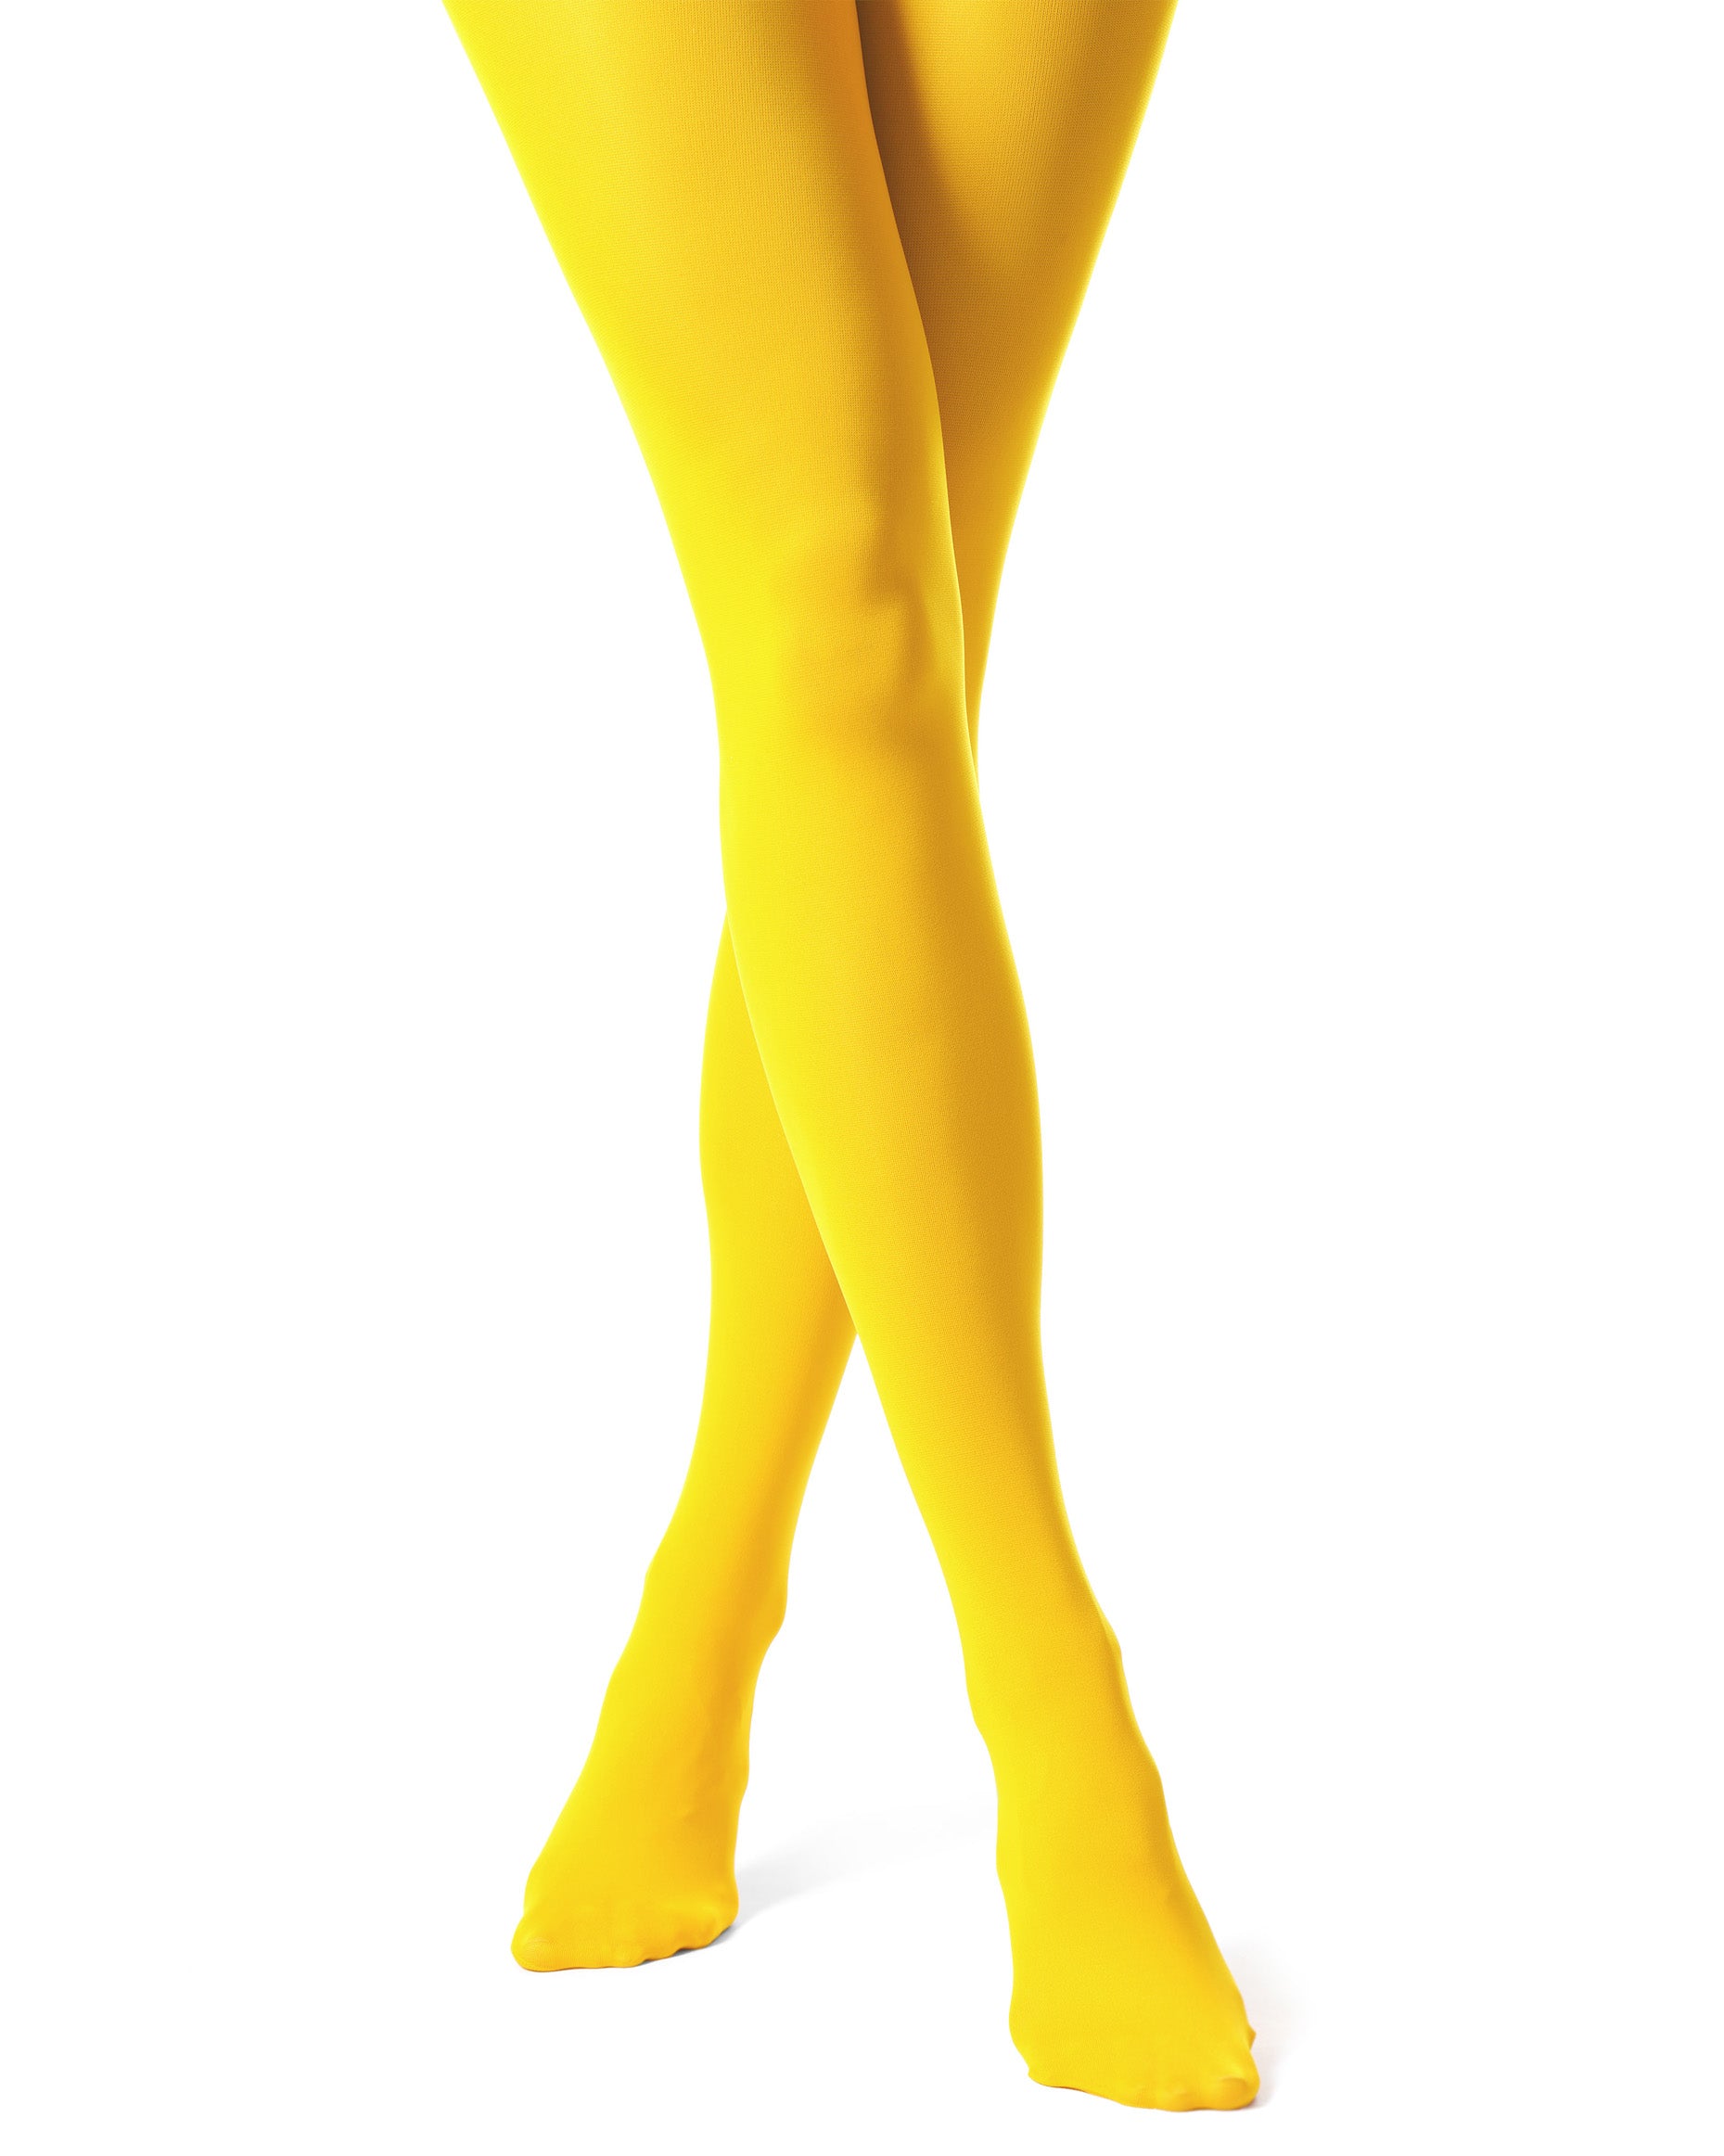 Trasparenze Sophie 70 Collant - coloured opaque tights in bright yellow.